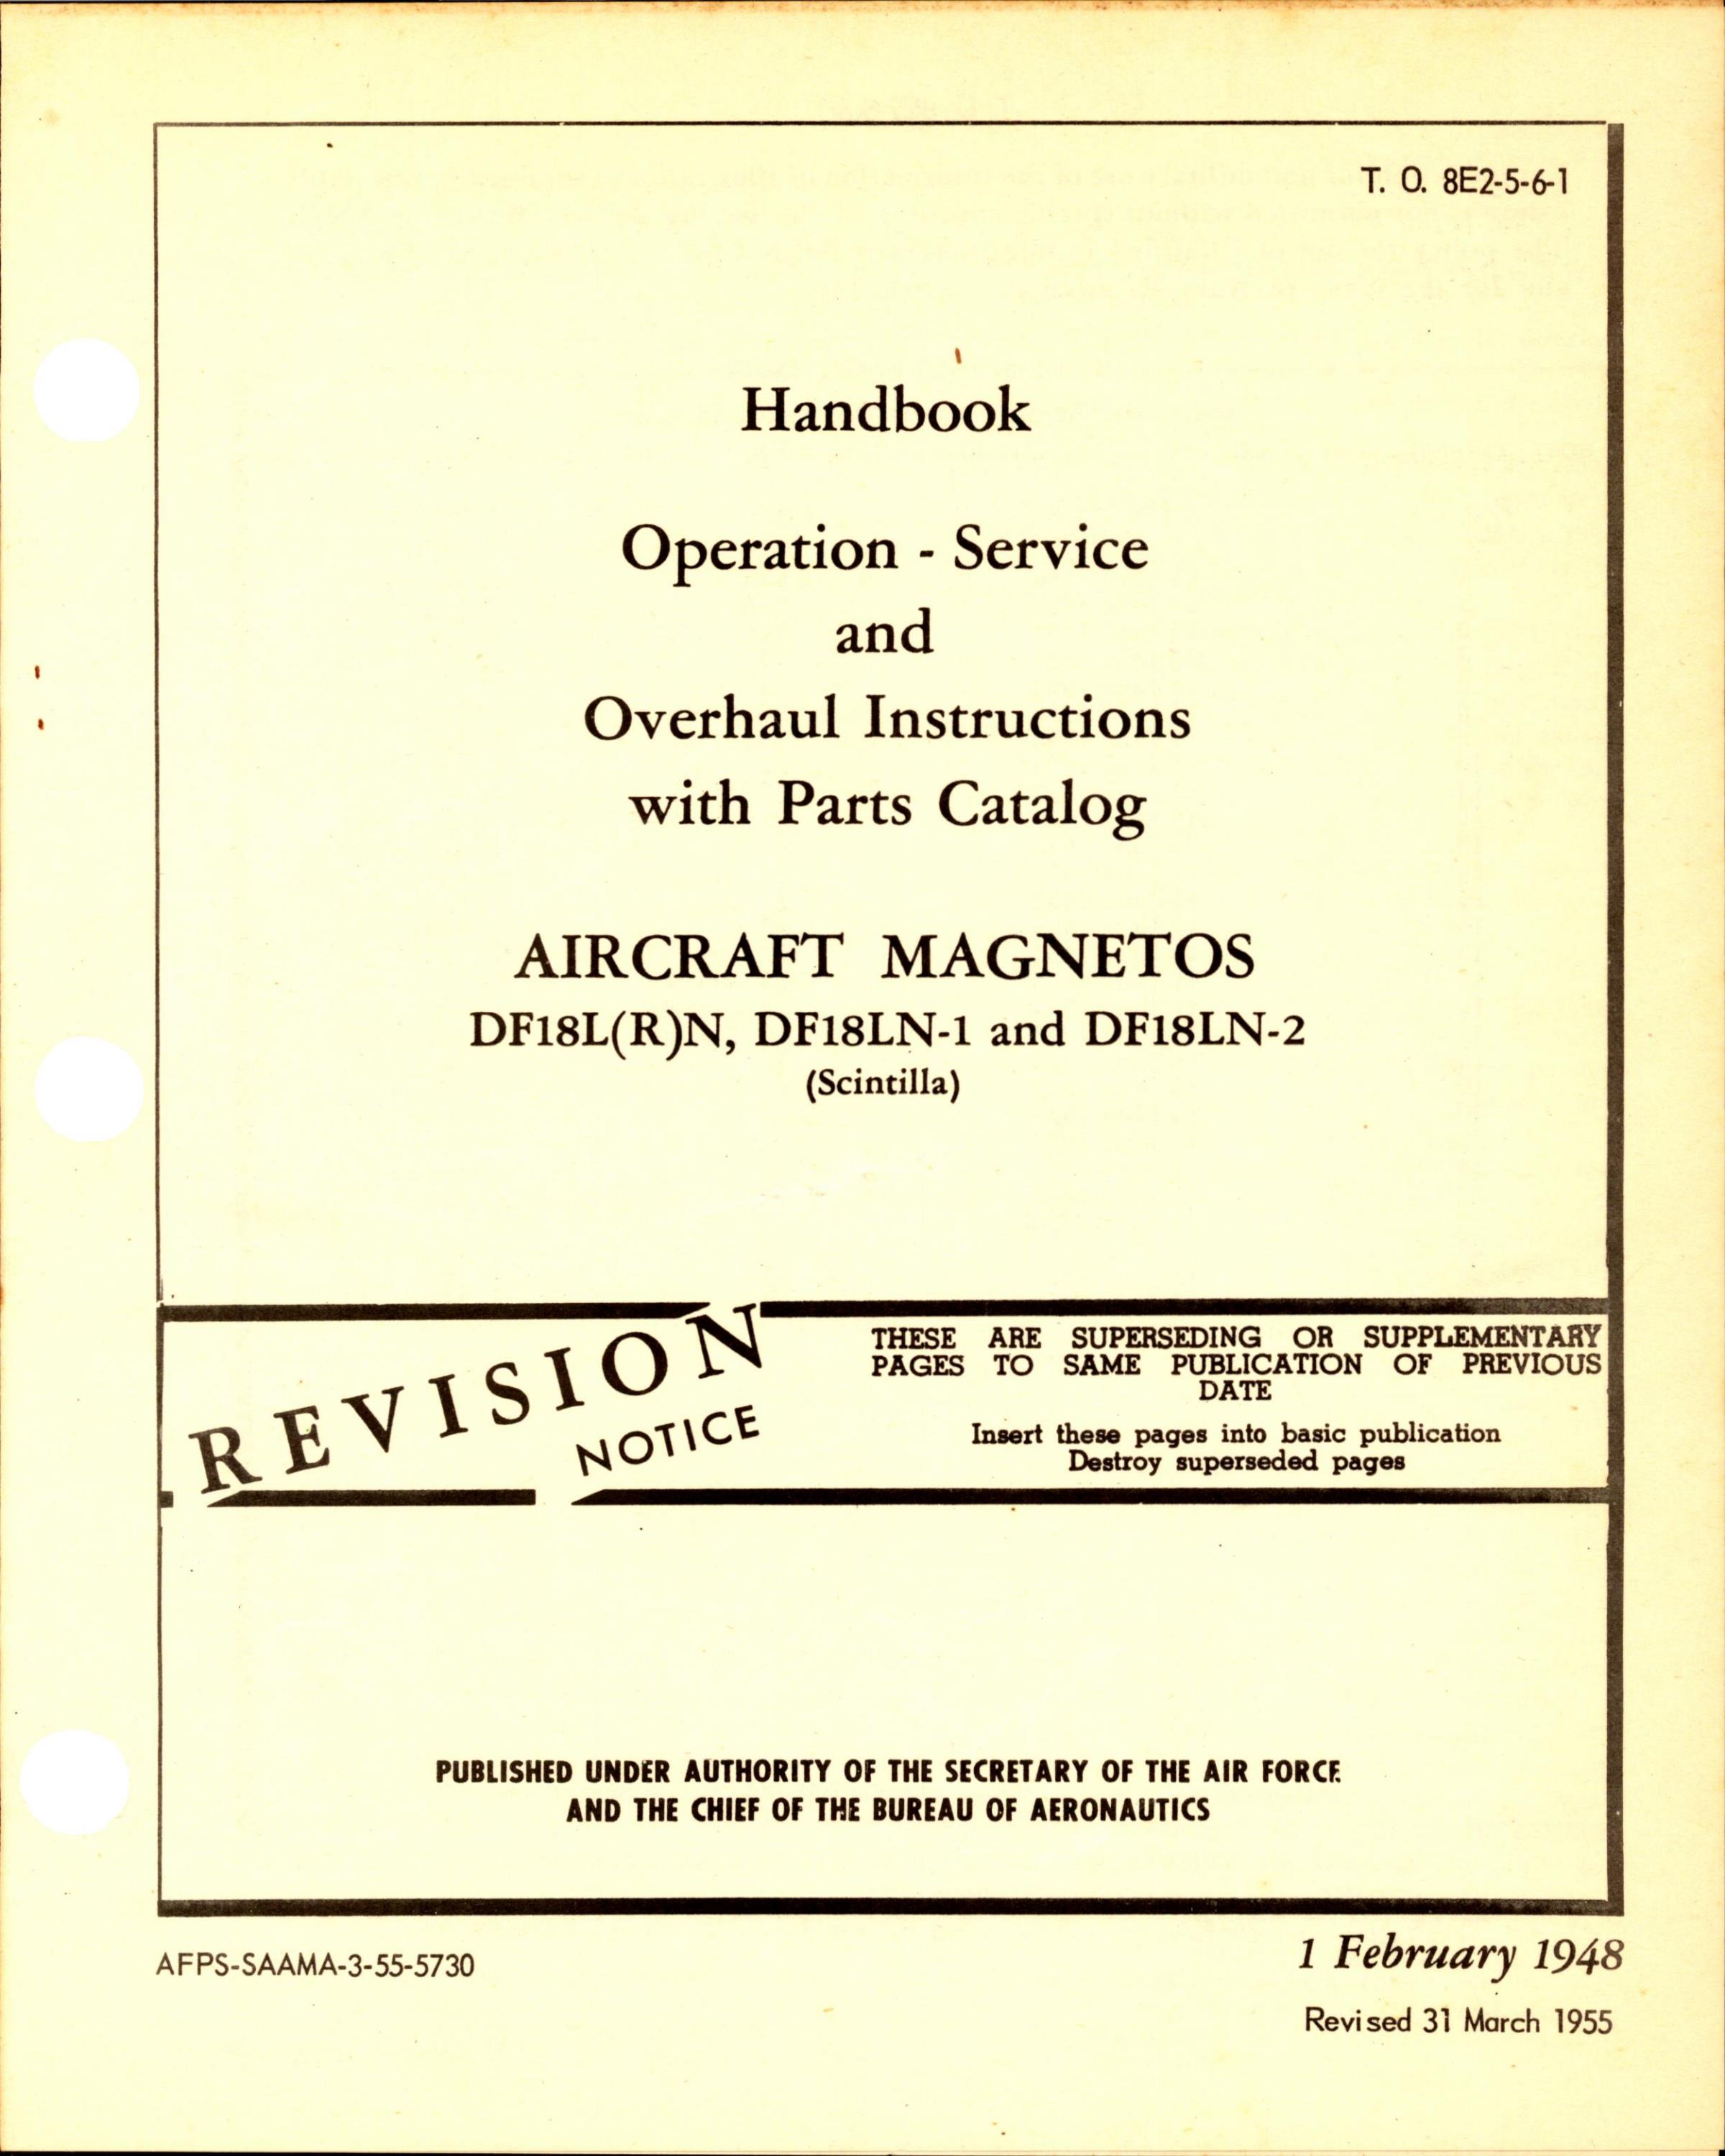 Sample page 1 from AirCorps Library document: Overhaul Instructions with Parts Catalog for Aircraft Magnetos